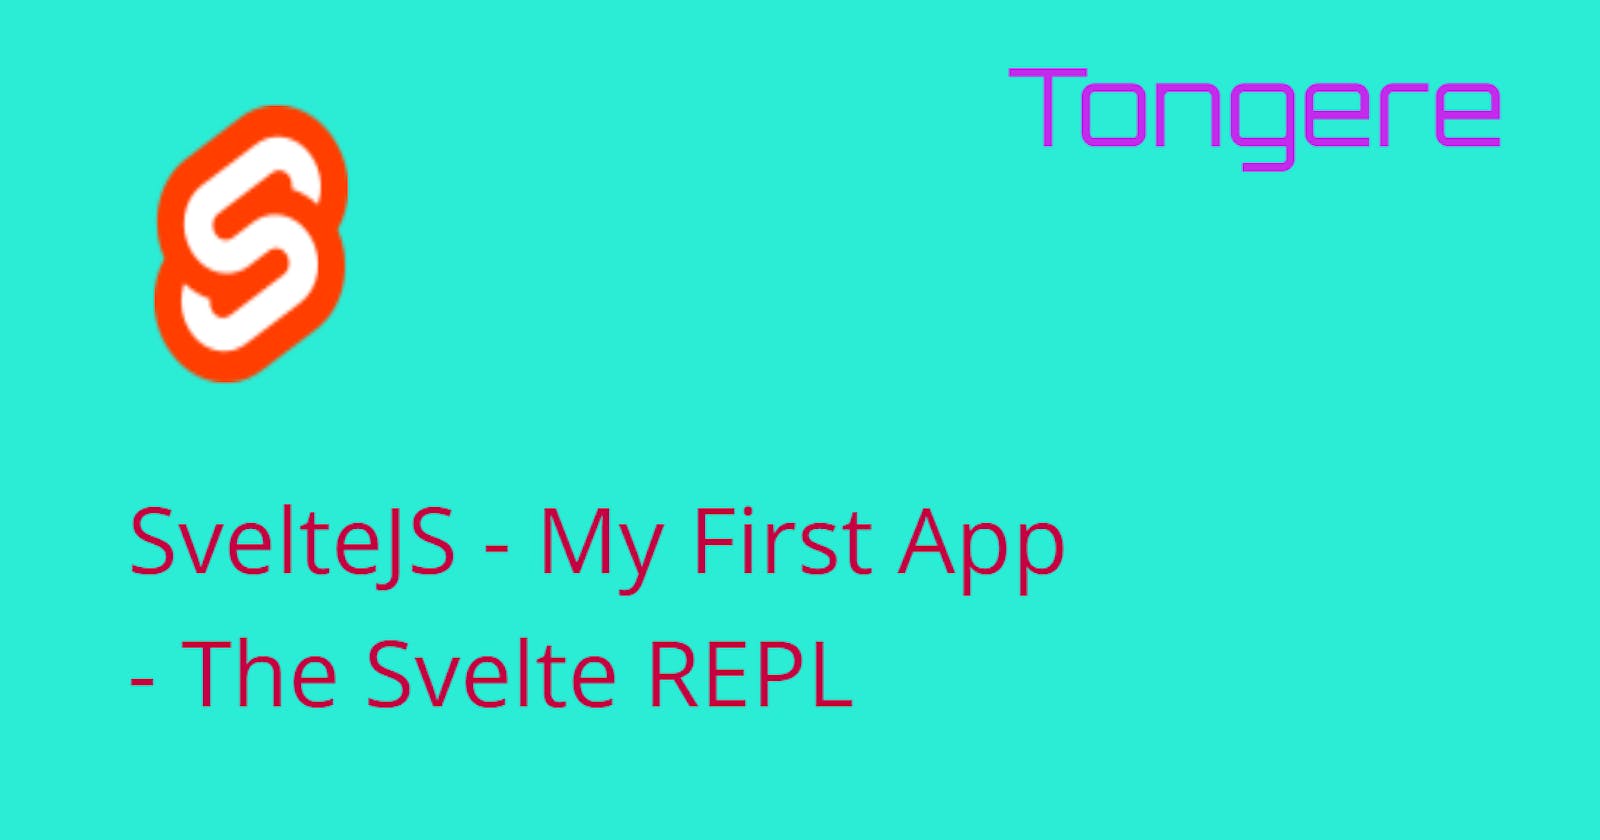 Svelte - My First App in the Svelte REPL